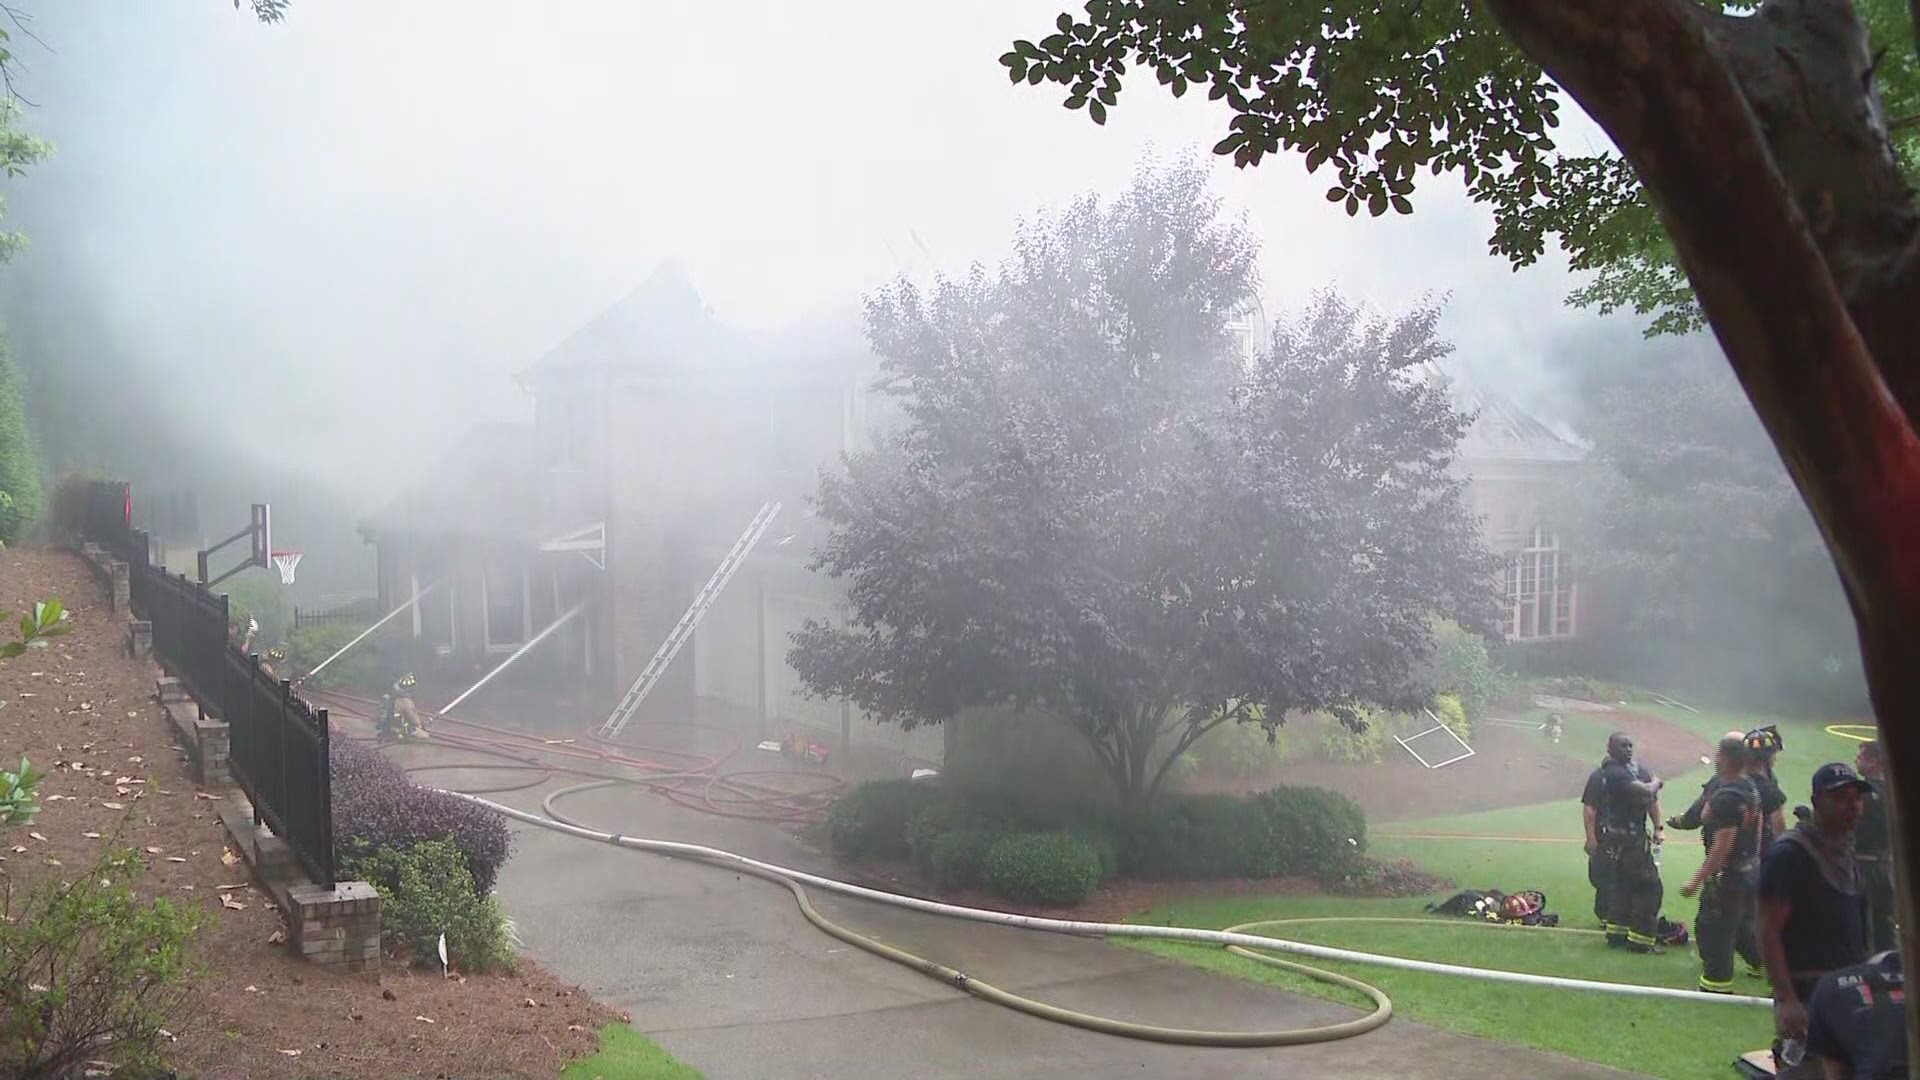 Fire officials said there were no reported injuries and investigators are working to determine the cause of the fire.